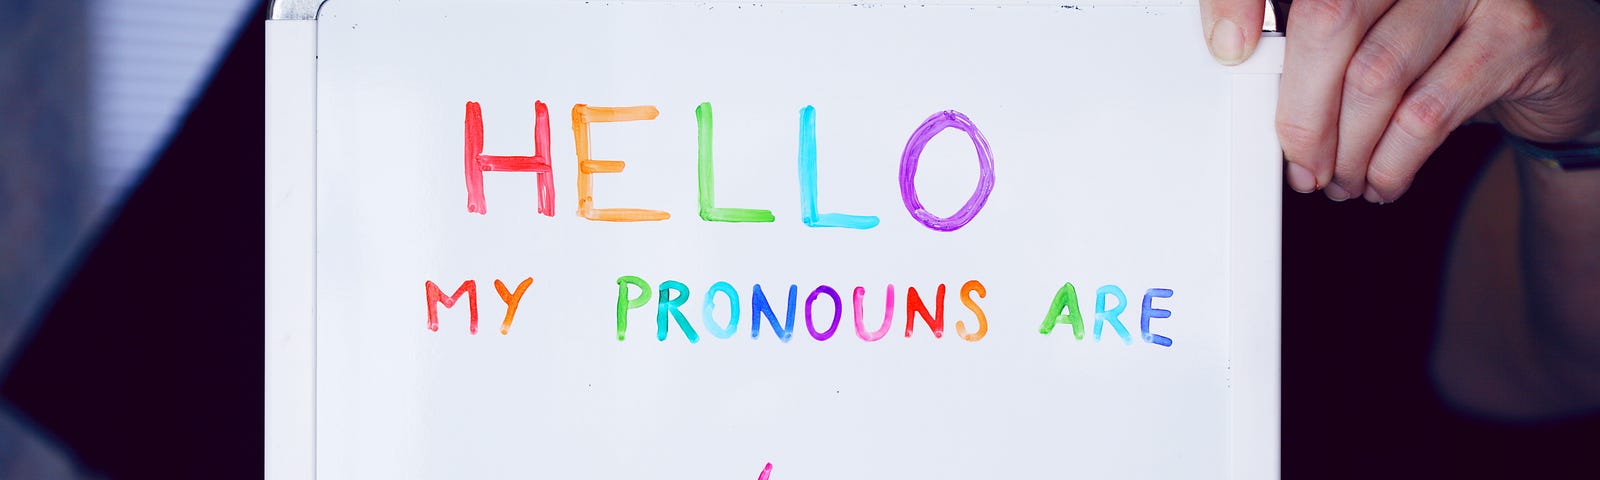 Someone holding up a whiteboard marked with a rainbow gel pen. The words “Hello, my pronouns are:” are inscribed across the top, with space below it for someone to fill in the blanks.